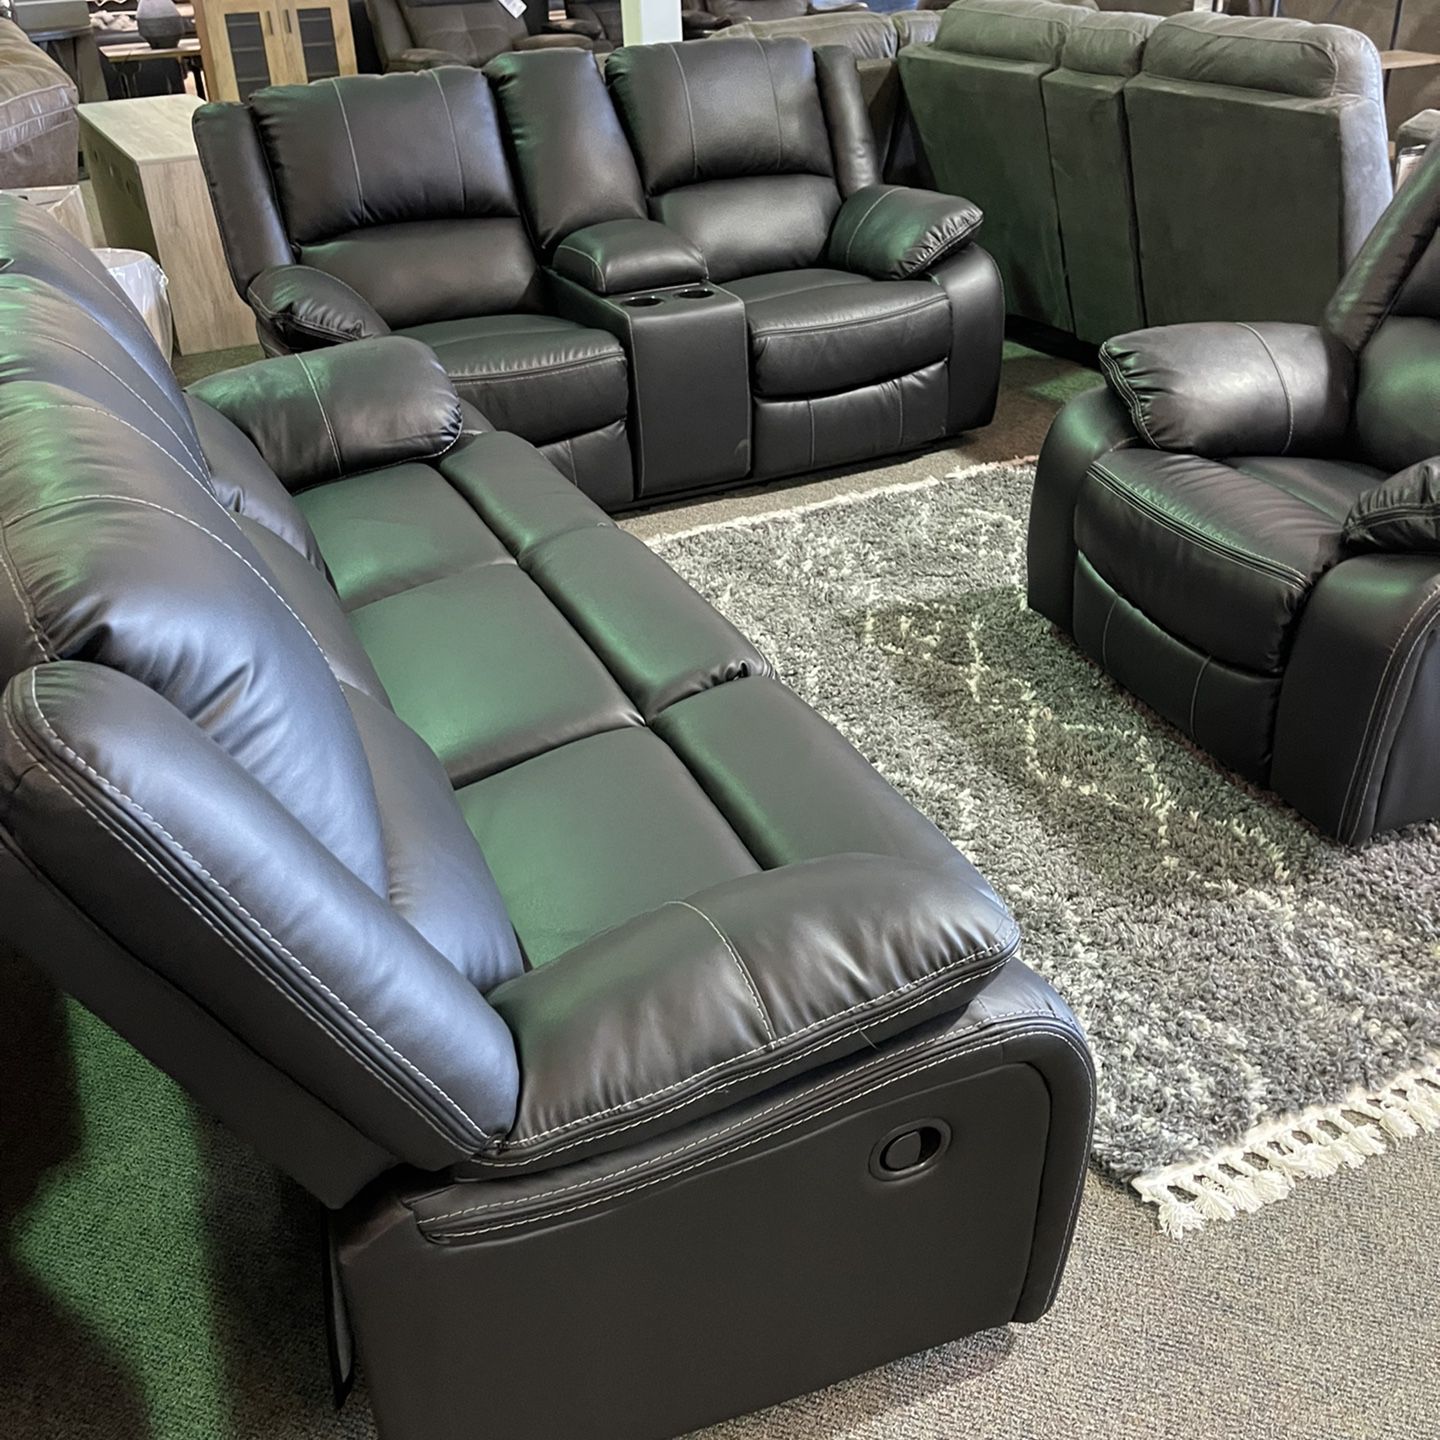 Black Leather Reclining Sofa Live Chair Set 🤩IN STOCK💥$49DOWN-TakeNow-PayLater with financing 